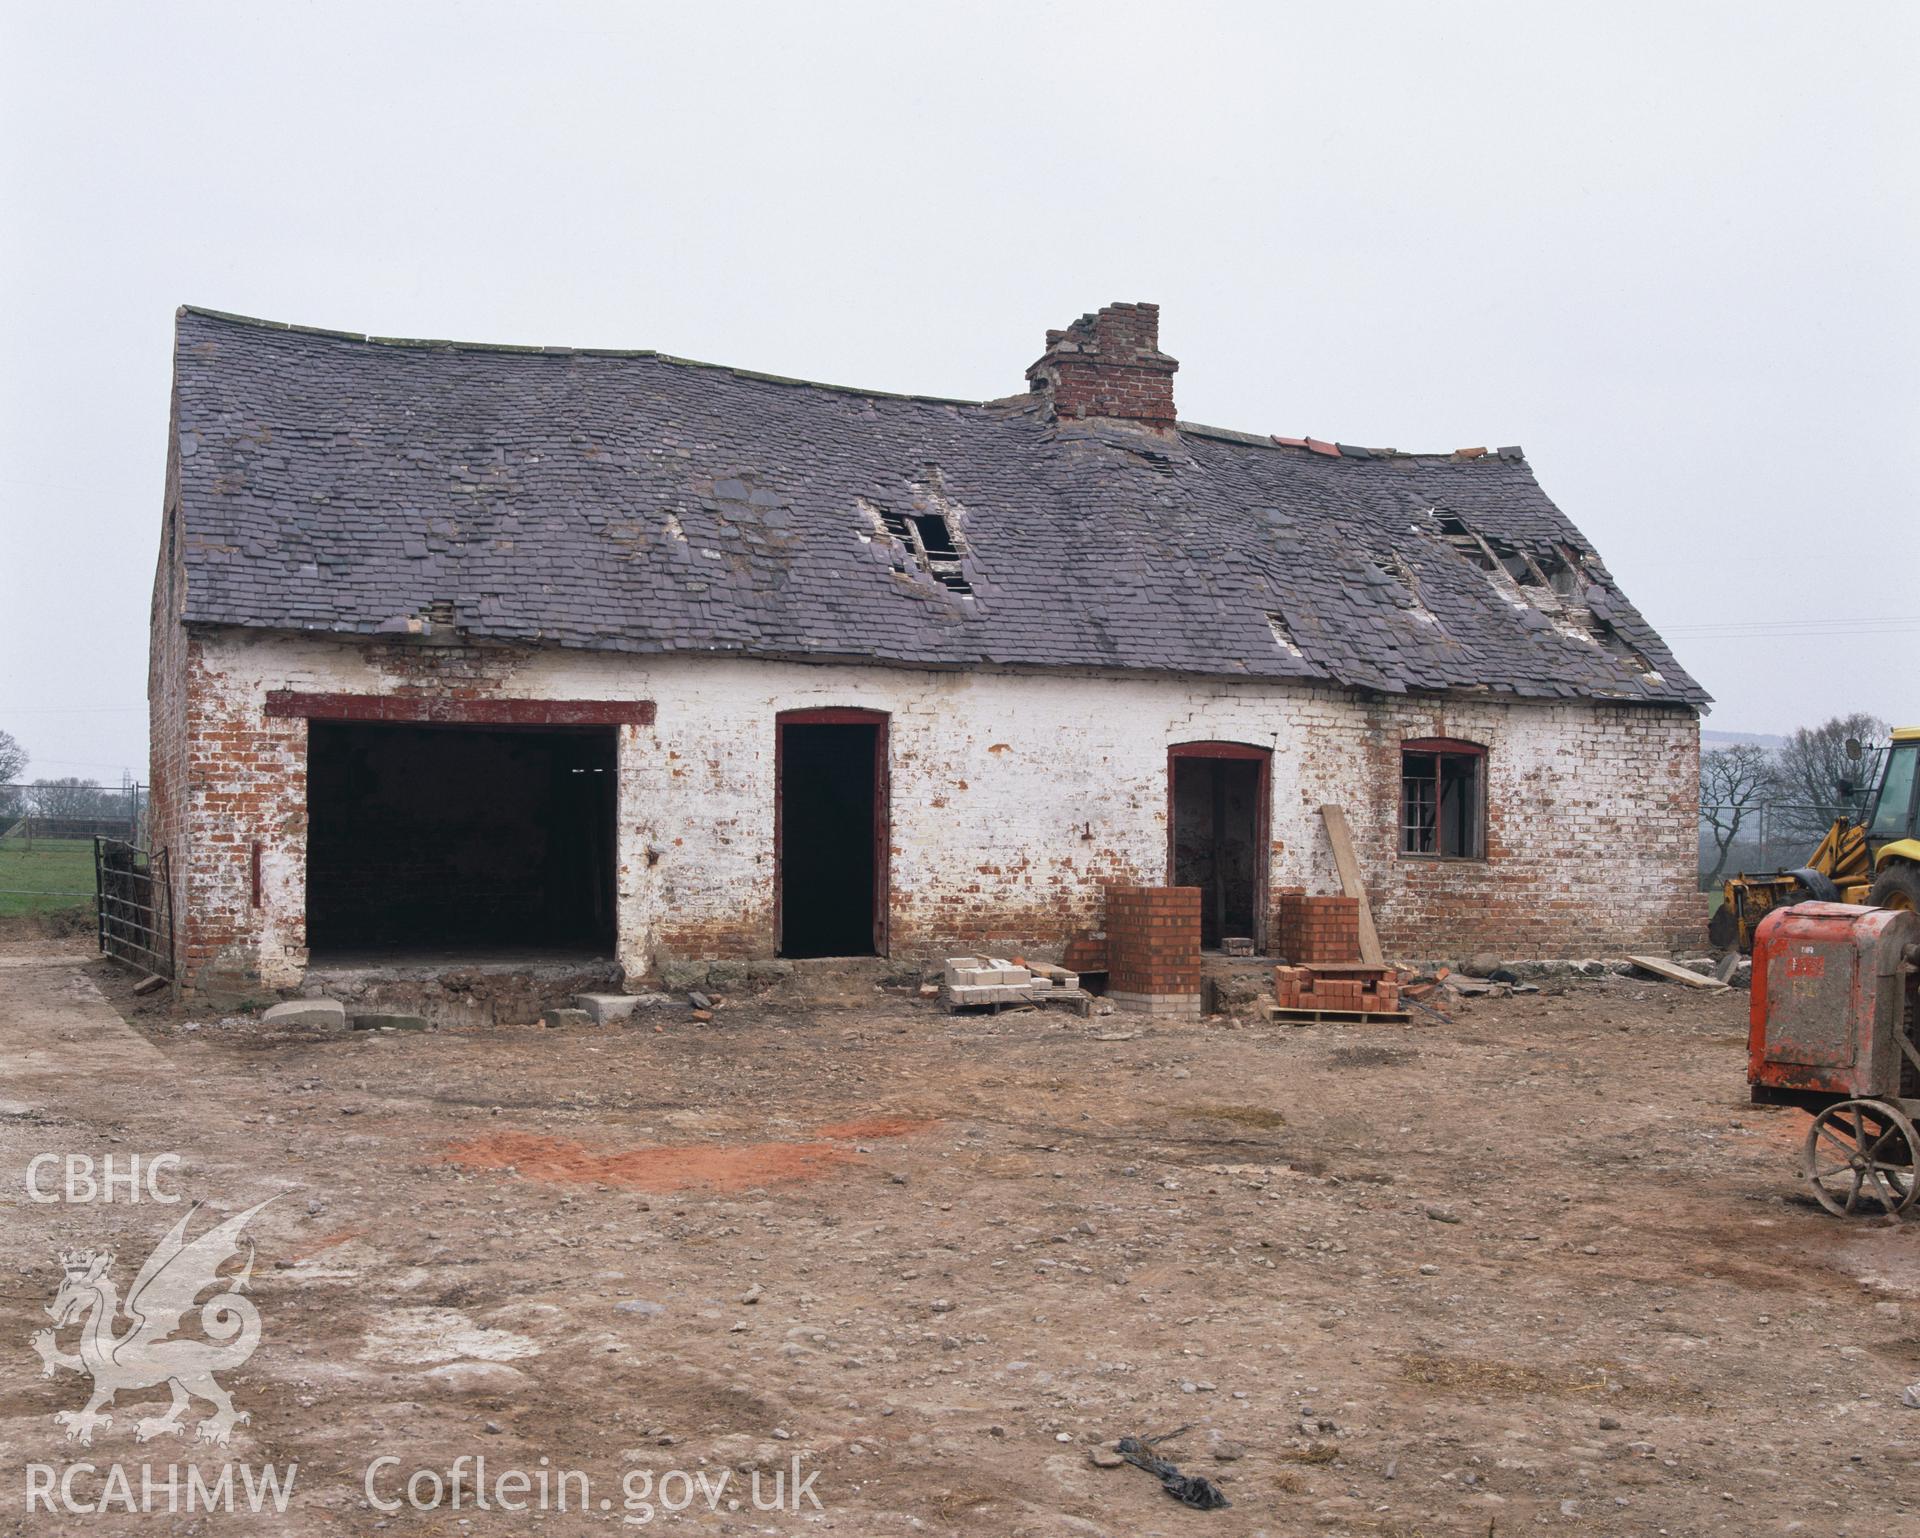 RCAHMW colour transparency showing exterior view of Waen Farmhouse, St Asaph, taken by Iain Wright, 2003.